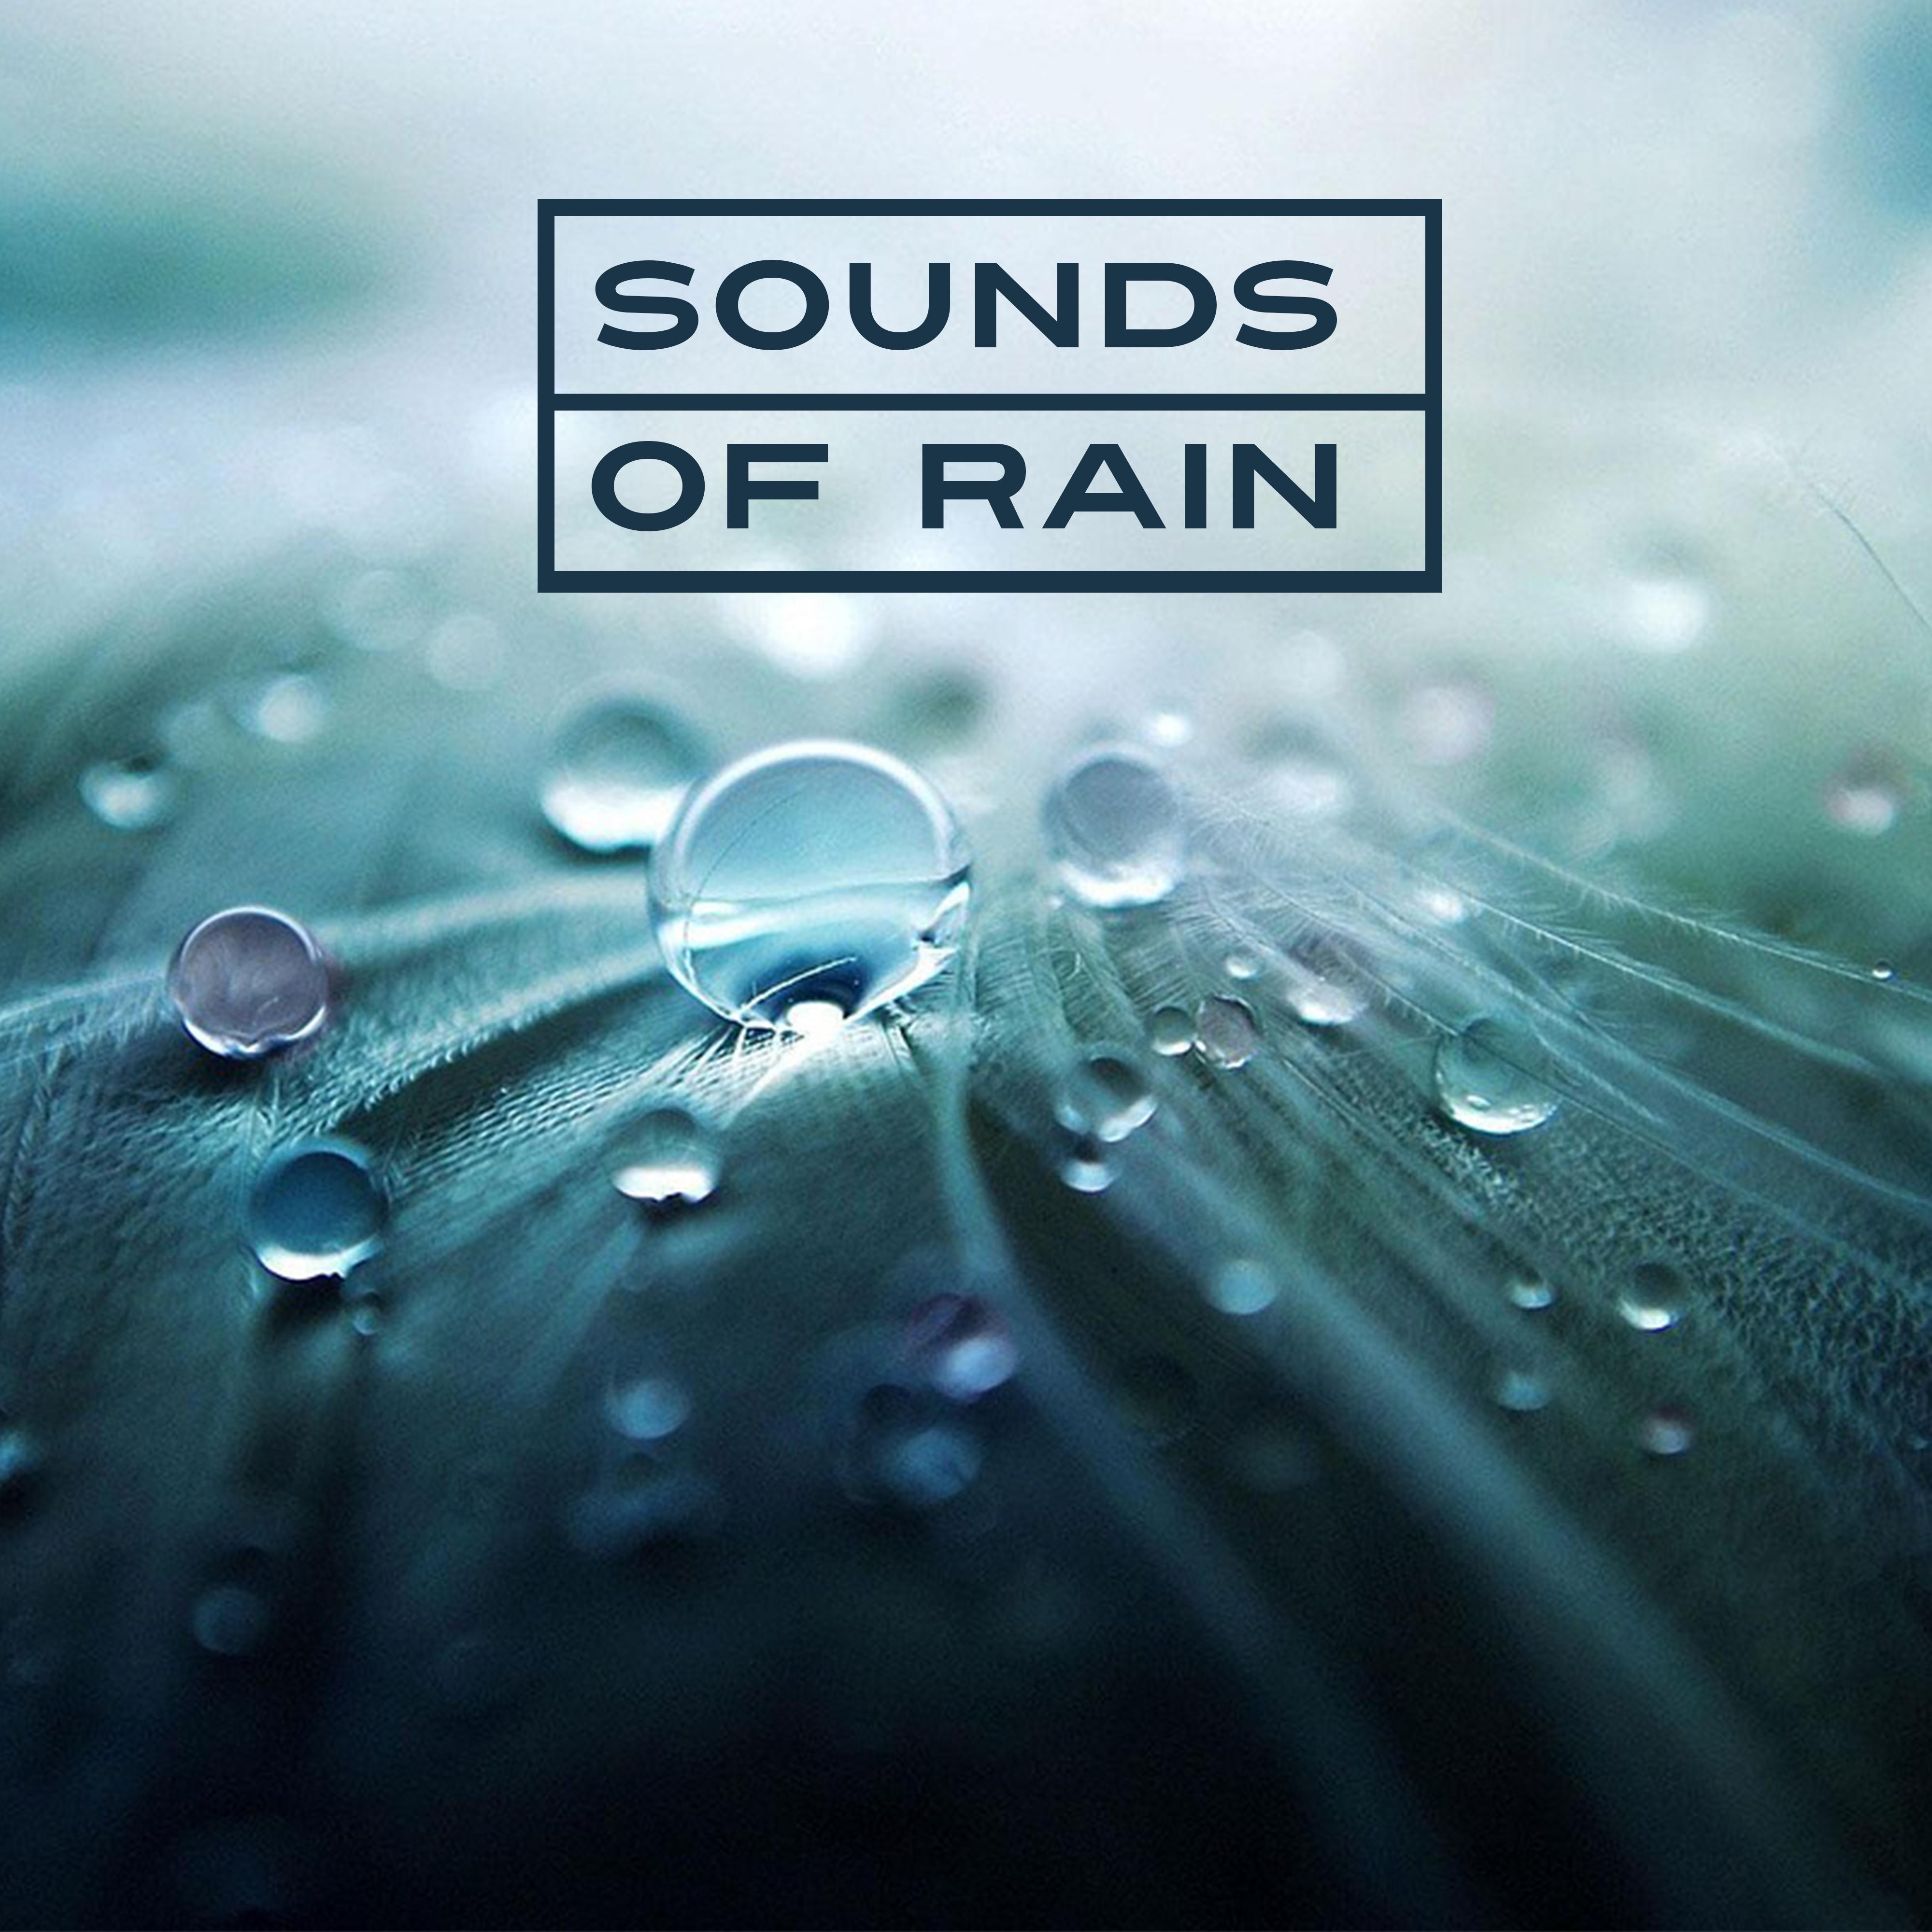 Sounds of Rain  Relaxing Music, New Age Sounds, Water Waves, Rainfall Sounds